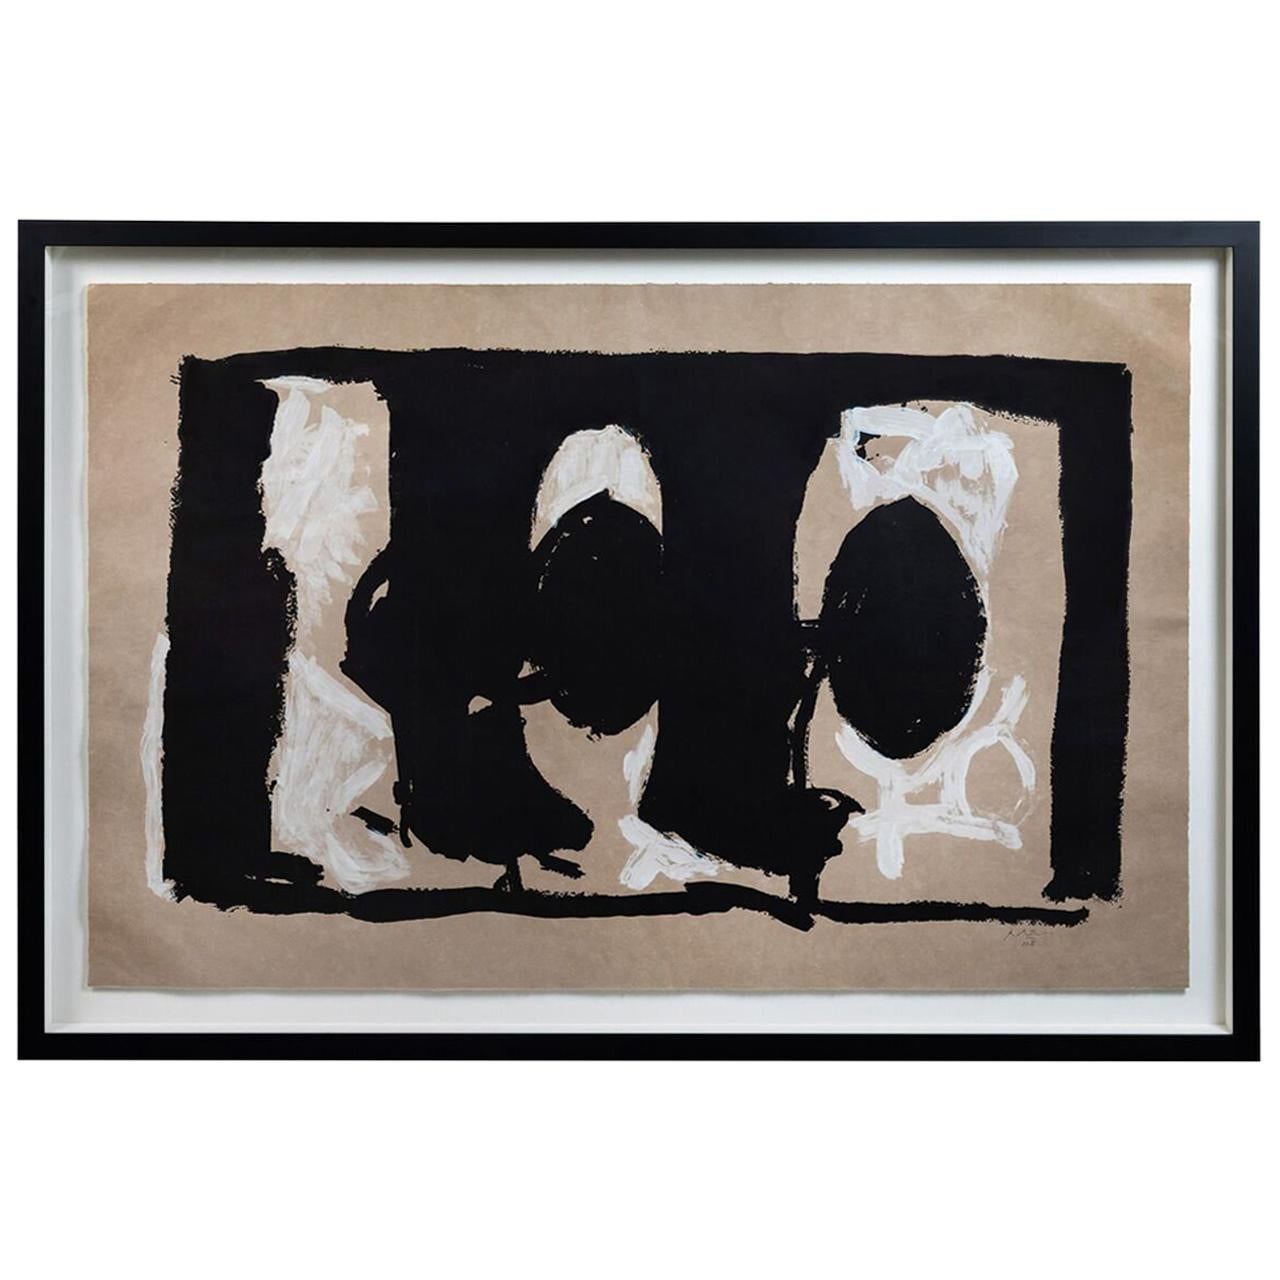 Large, Signed and Numbered, Robert Motherwell Lithograph